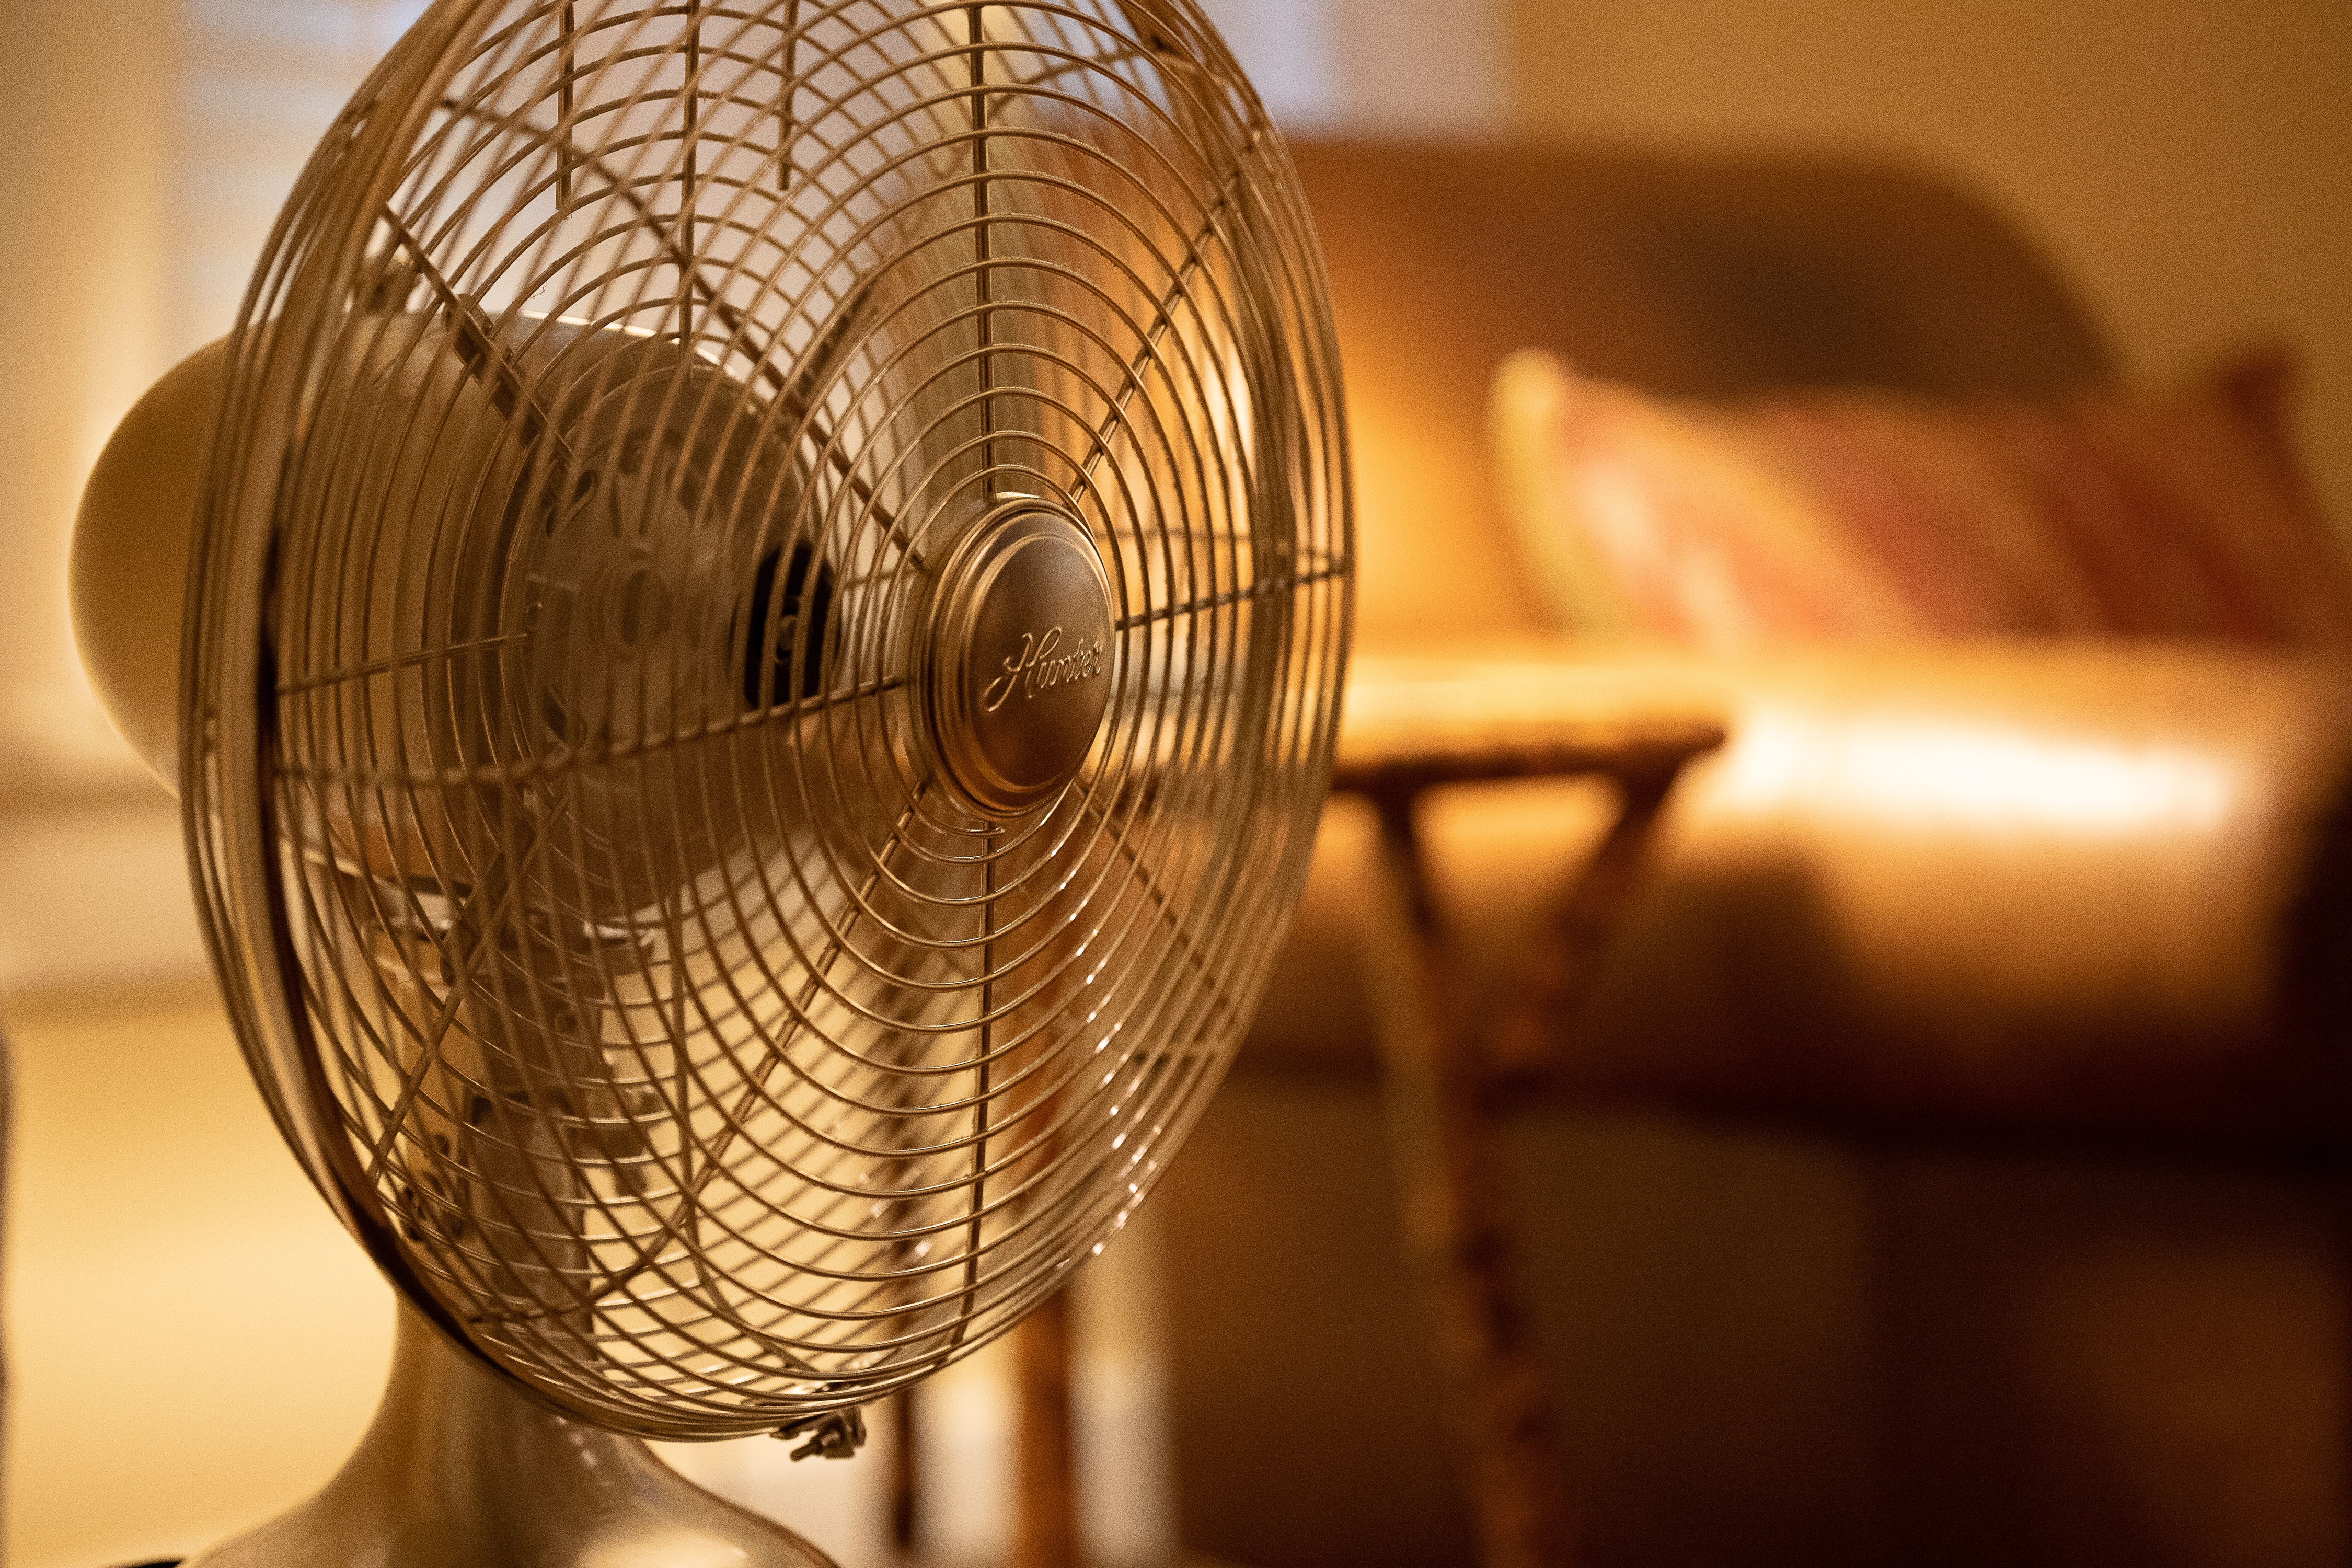 Tips on how to keep cool air distributed in your house during a heatwave